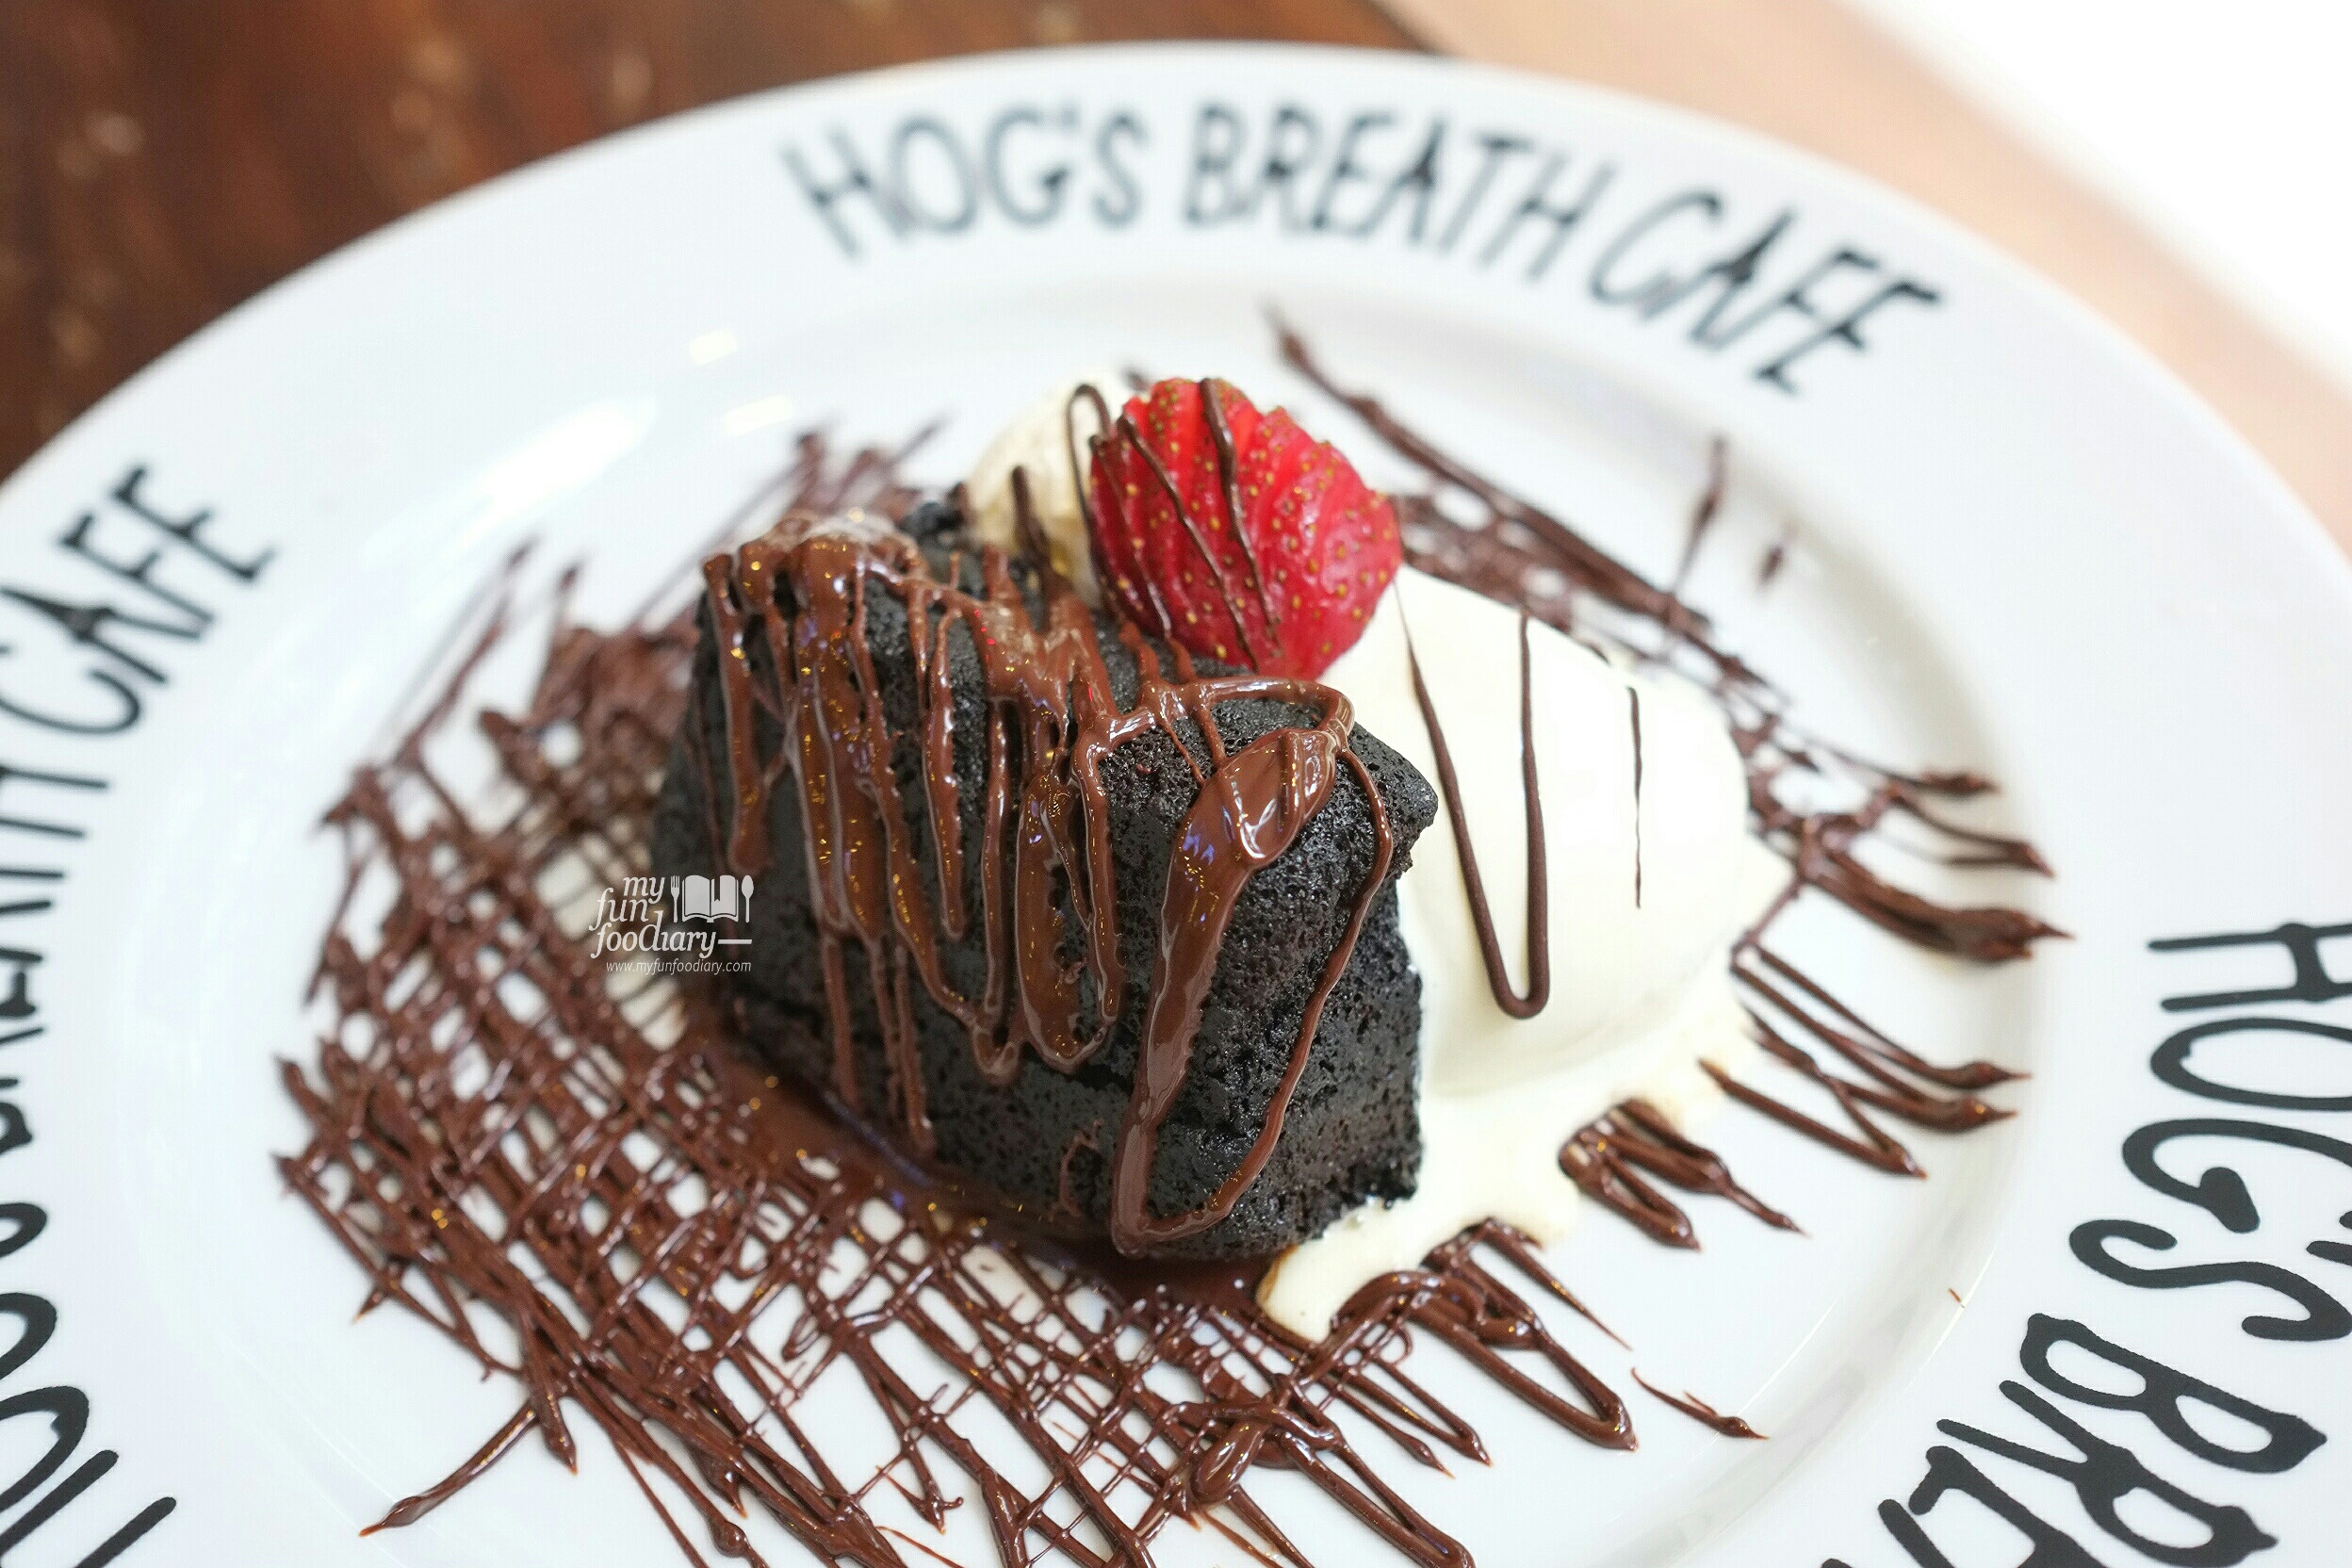 Mississippi Mud Cake at Hogs Breath Cafe by Myfunfoodiary